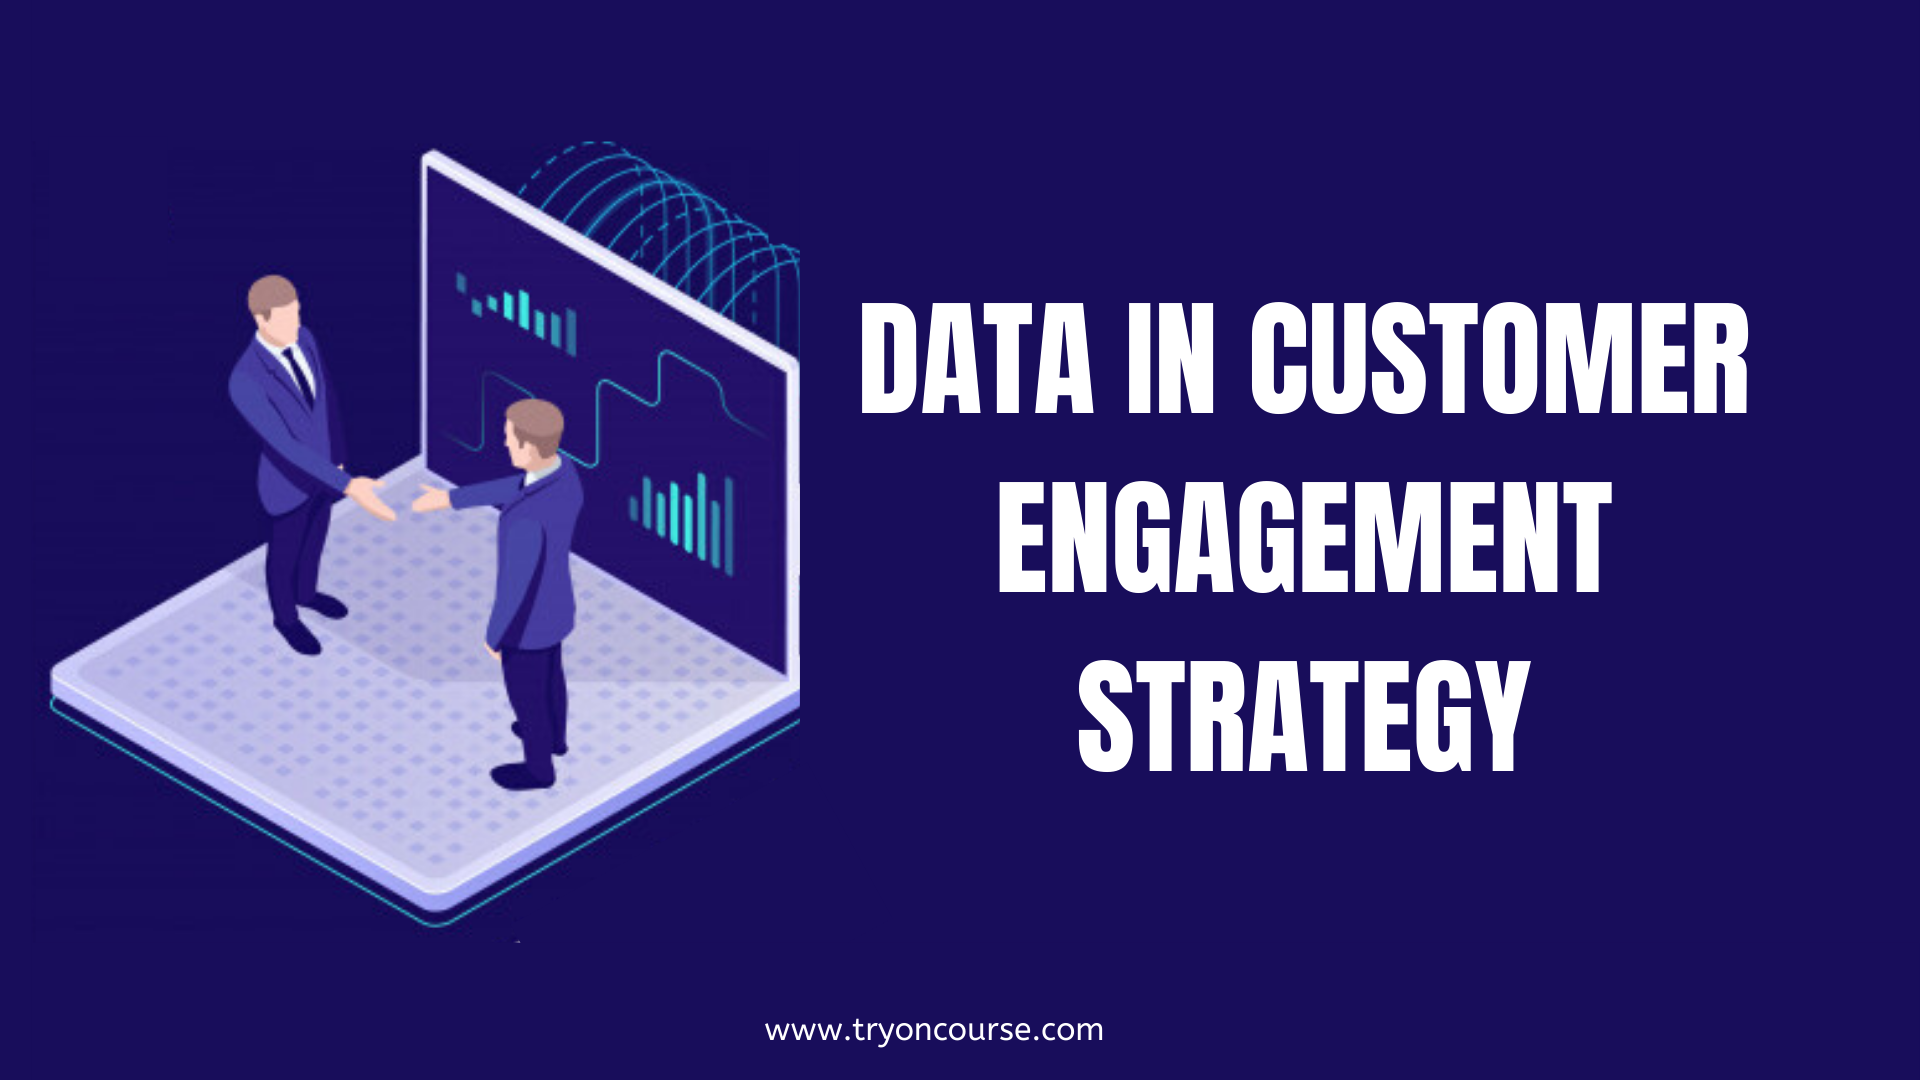 Using data in your customer engagement strategy to really know your customers